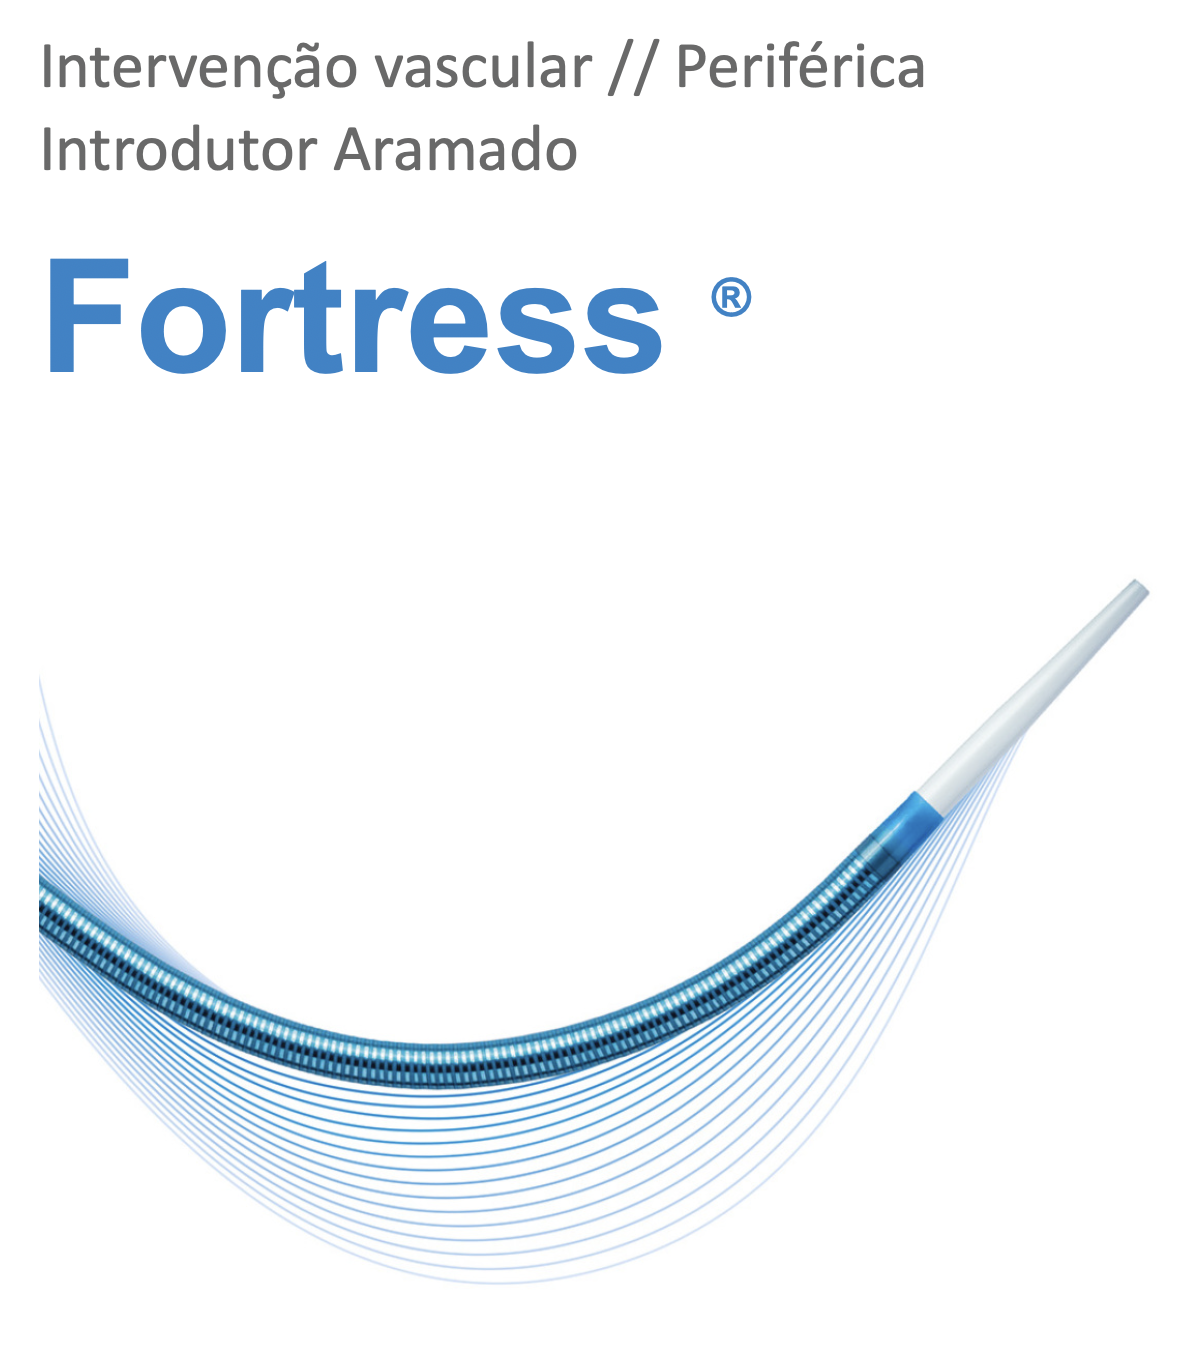 Fortress